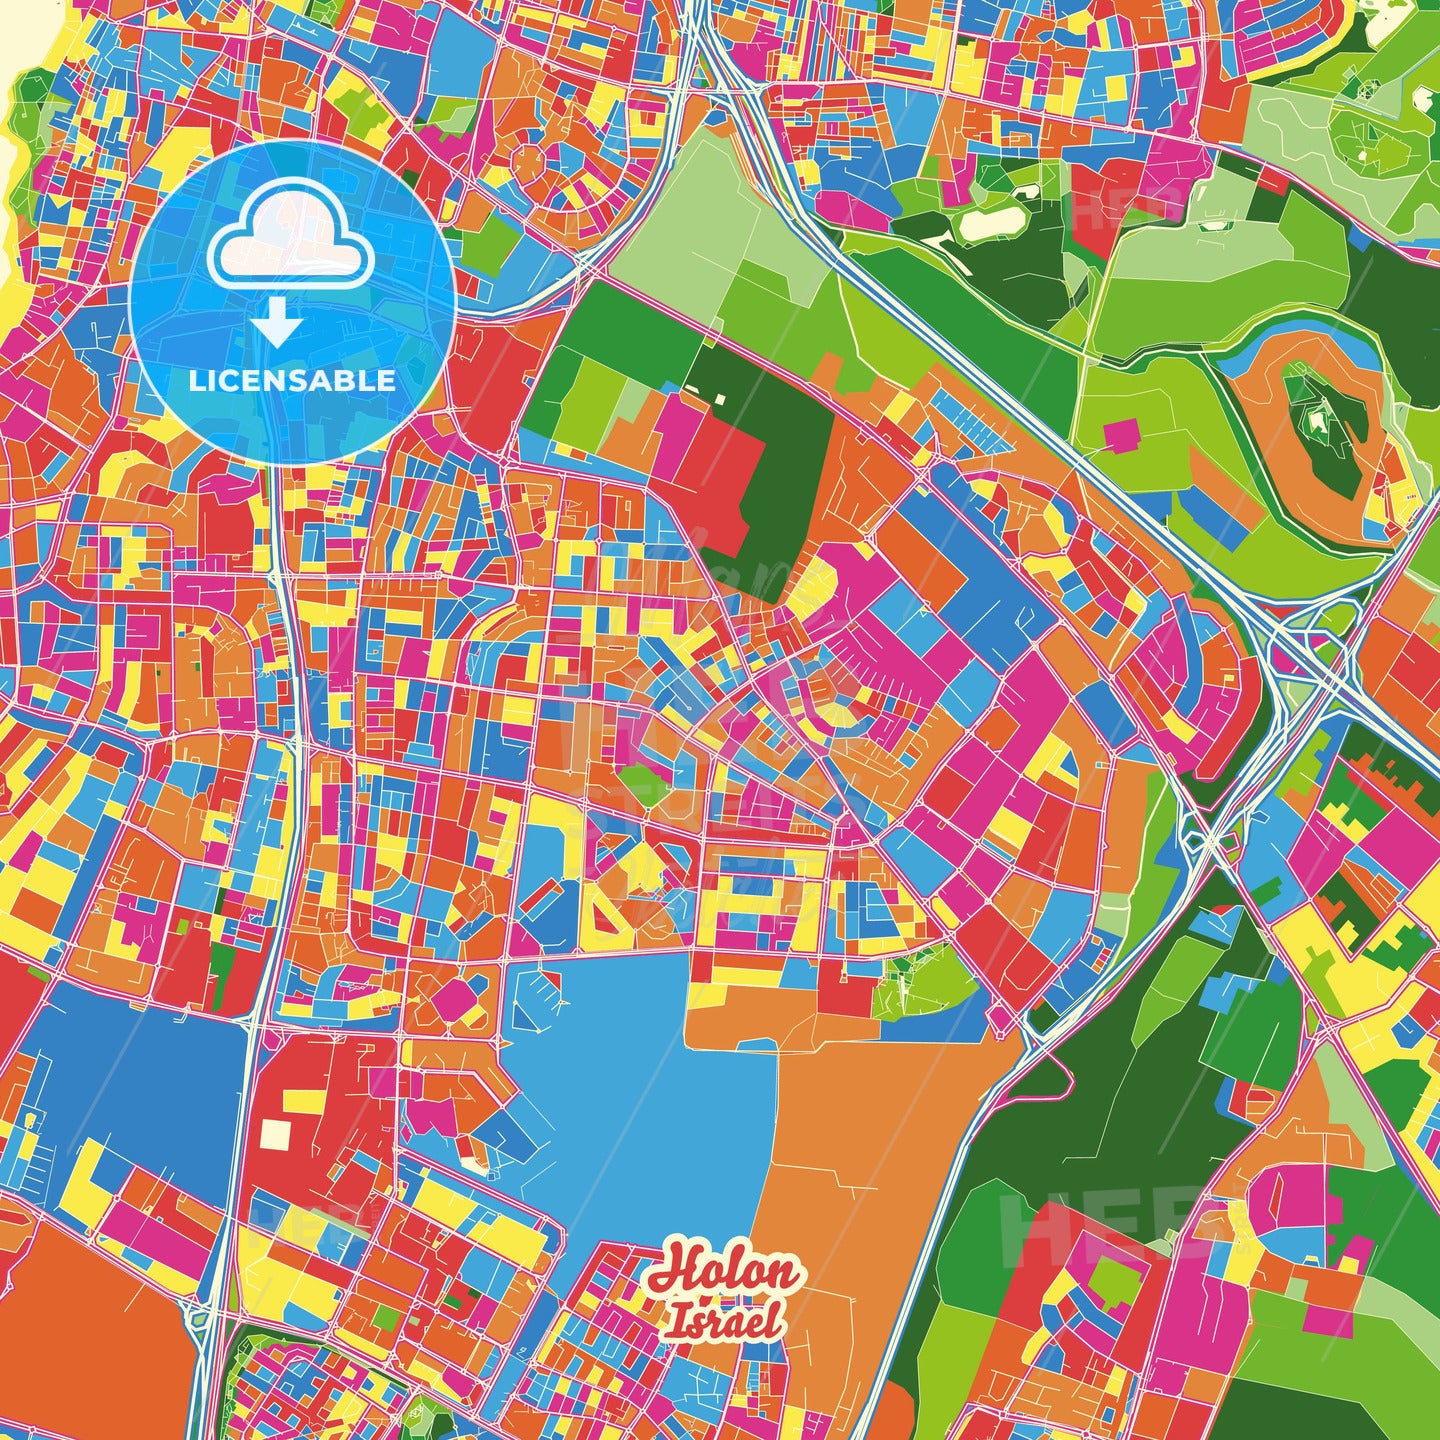 Holon, Israel Crazy Colorful Street Map Poster Template - HEBSTREITS Sketches